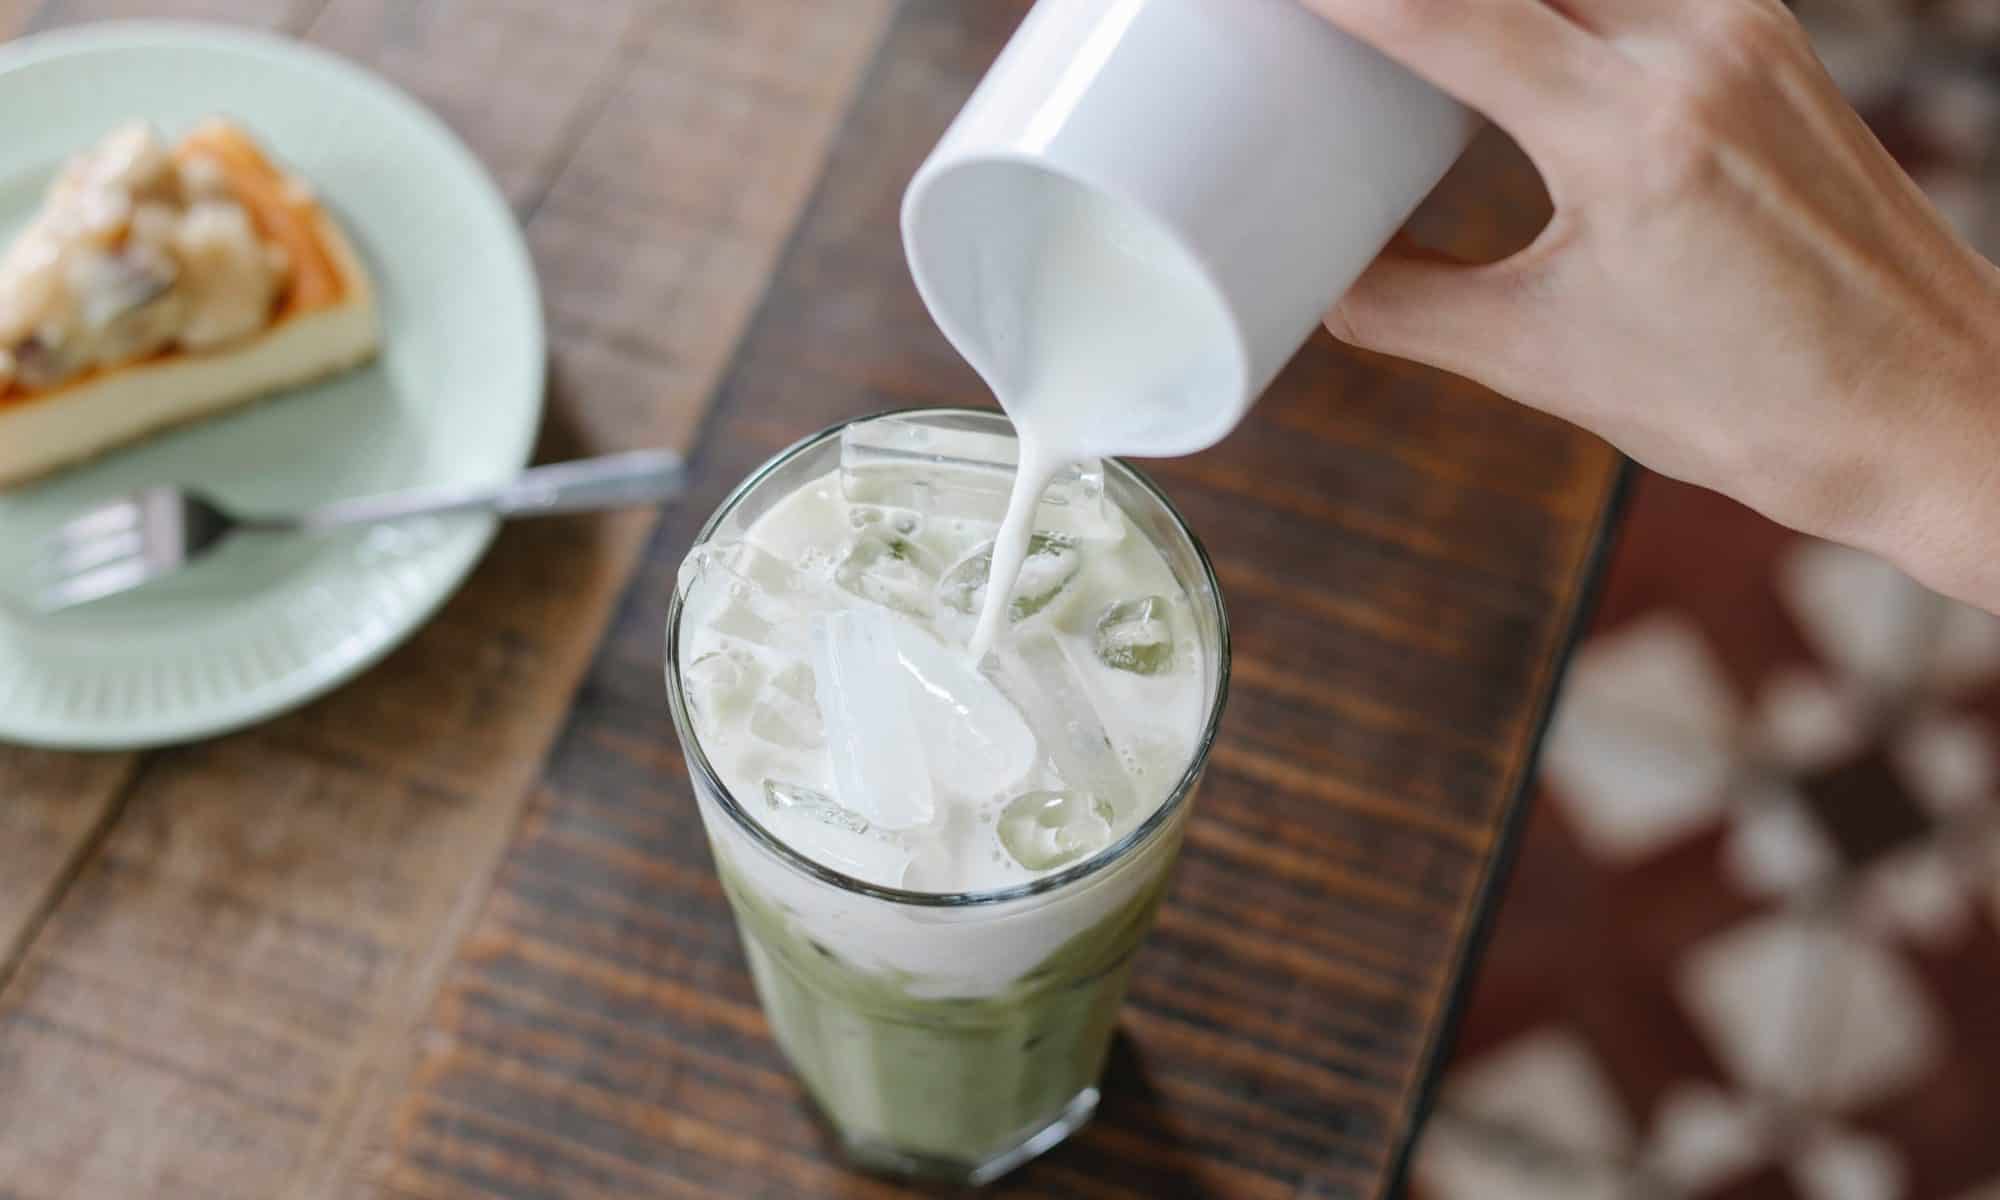 Photo by Charlotte May: https://www.pexels.com/photo/crop-unrecognizable-woman-adding-milk-to-iced-matcha-tea-5946965/